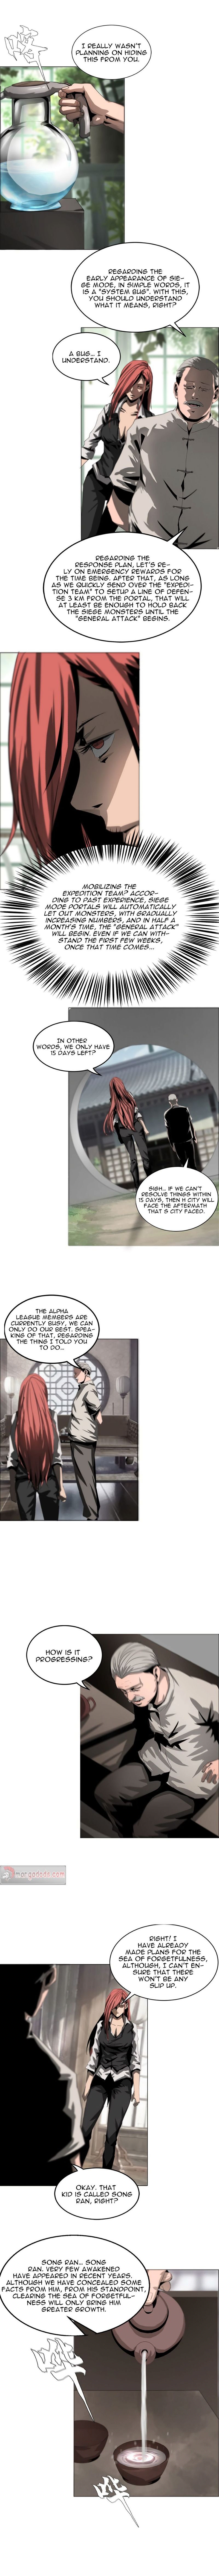 The Blade Of Evolution-Walking Alone In The Dungeon Chapter 21 page 7